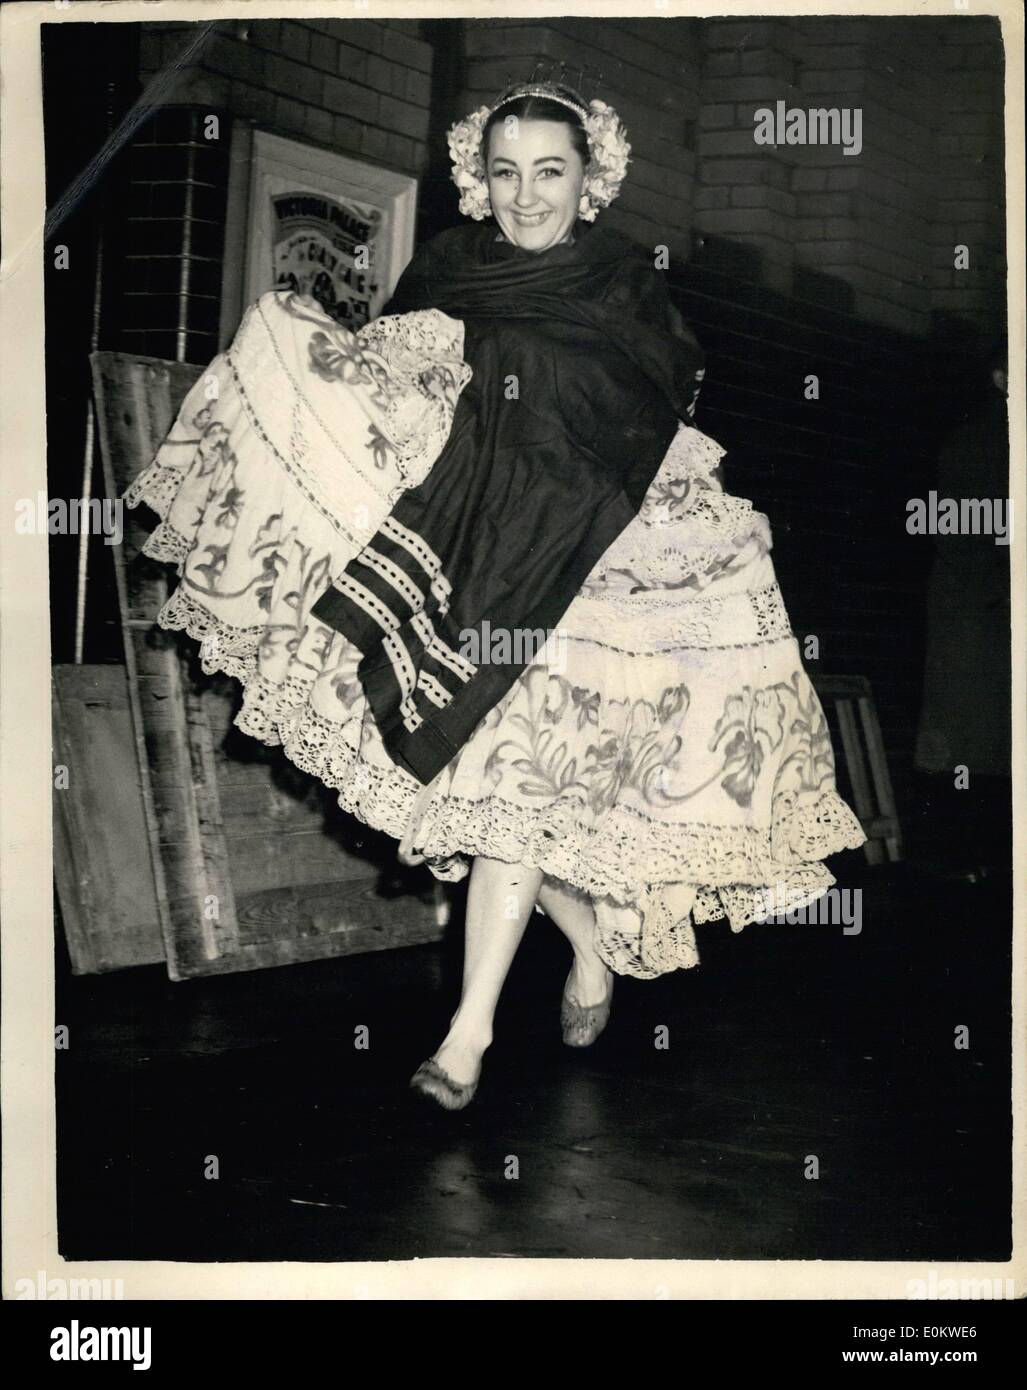 Oct. 10, 1951 - Artists in the royal Variety performance arrive by coaches at the Victoria Palane. Owing to the lack of dressing room accommodation at the Victoria Palace some of the artists had to use dressing rooms at near by theaters. Three motor coaches maintained a shutter service to carry them in their stage dress between the theaters. Photo shows One of the Latin-American appearing in the command performance hurries to the stage door of the Victoria palace after being brought there by one of the motor coaches. Stock Photo